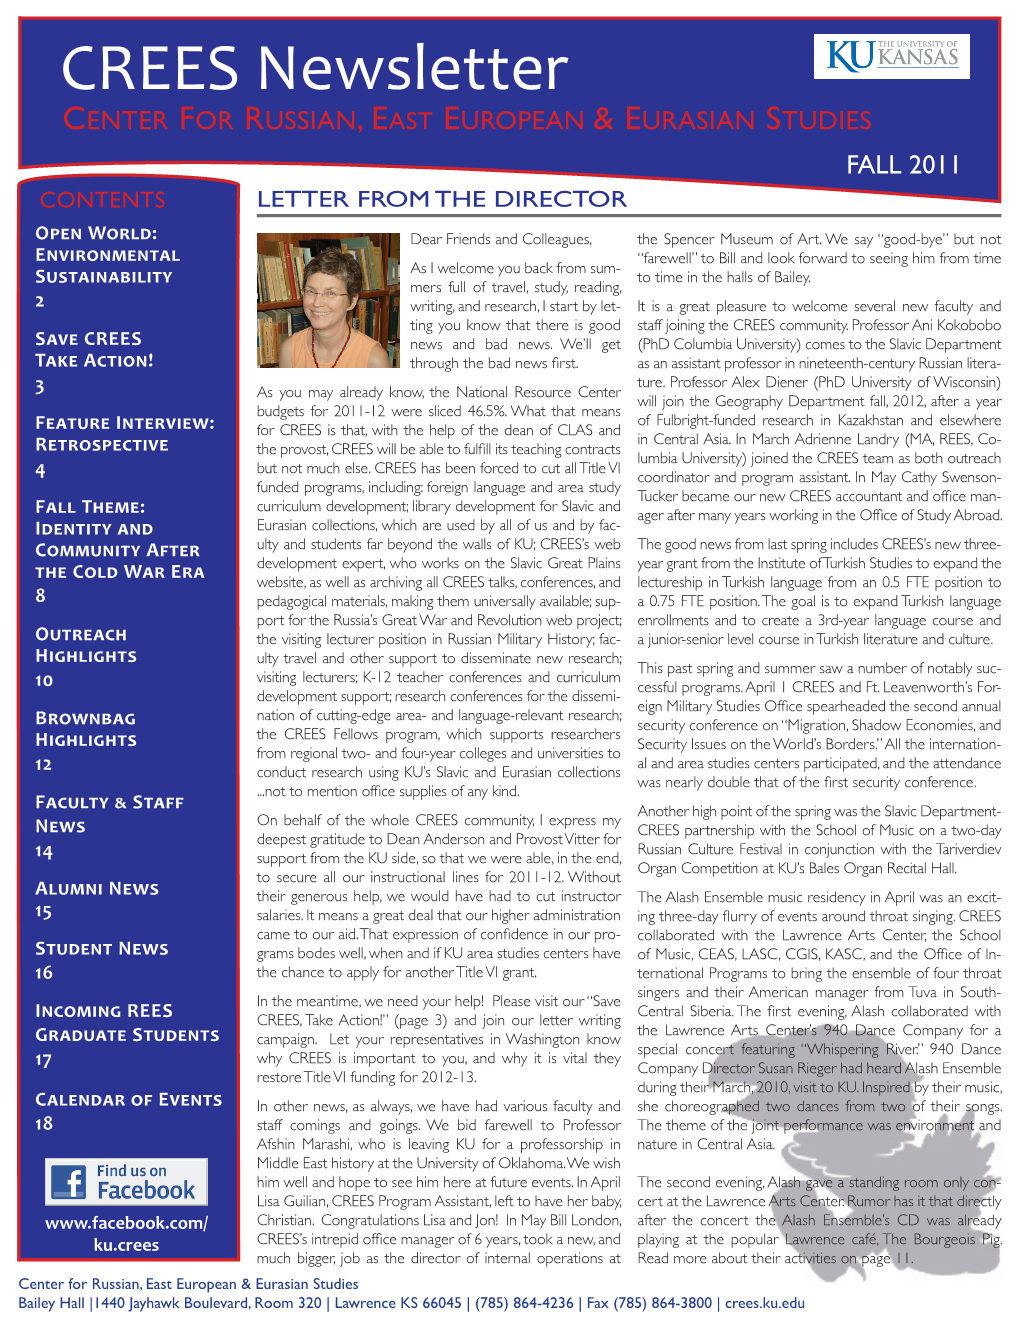 CREES NEWSLETTER FALL 2011.Indd